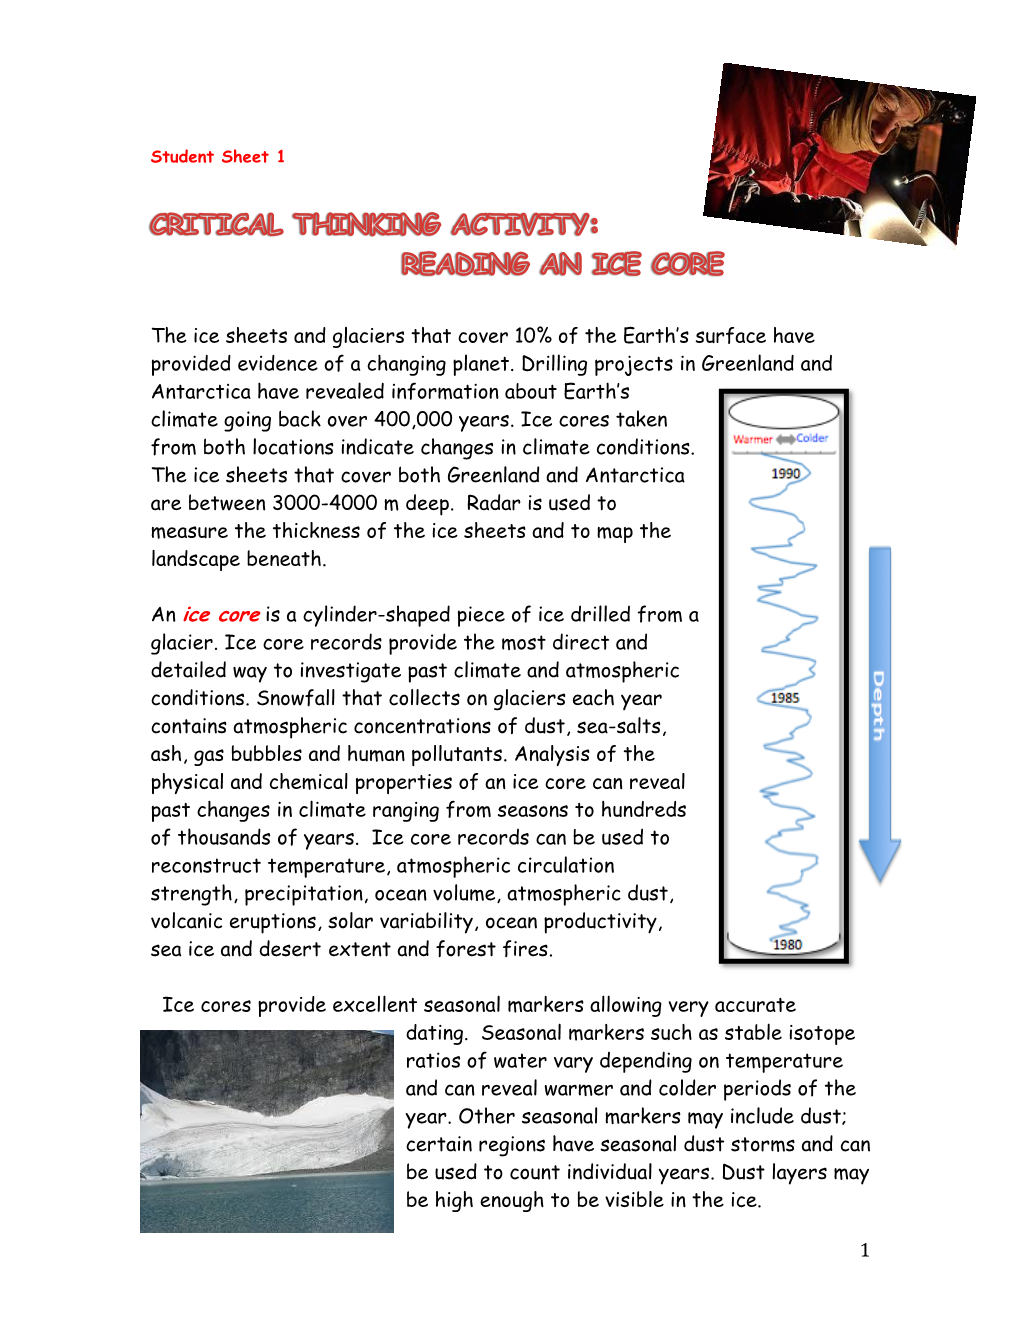 Reading an Ice Core